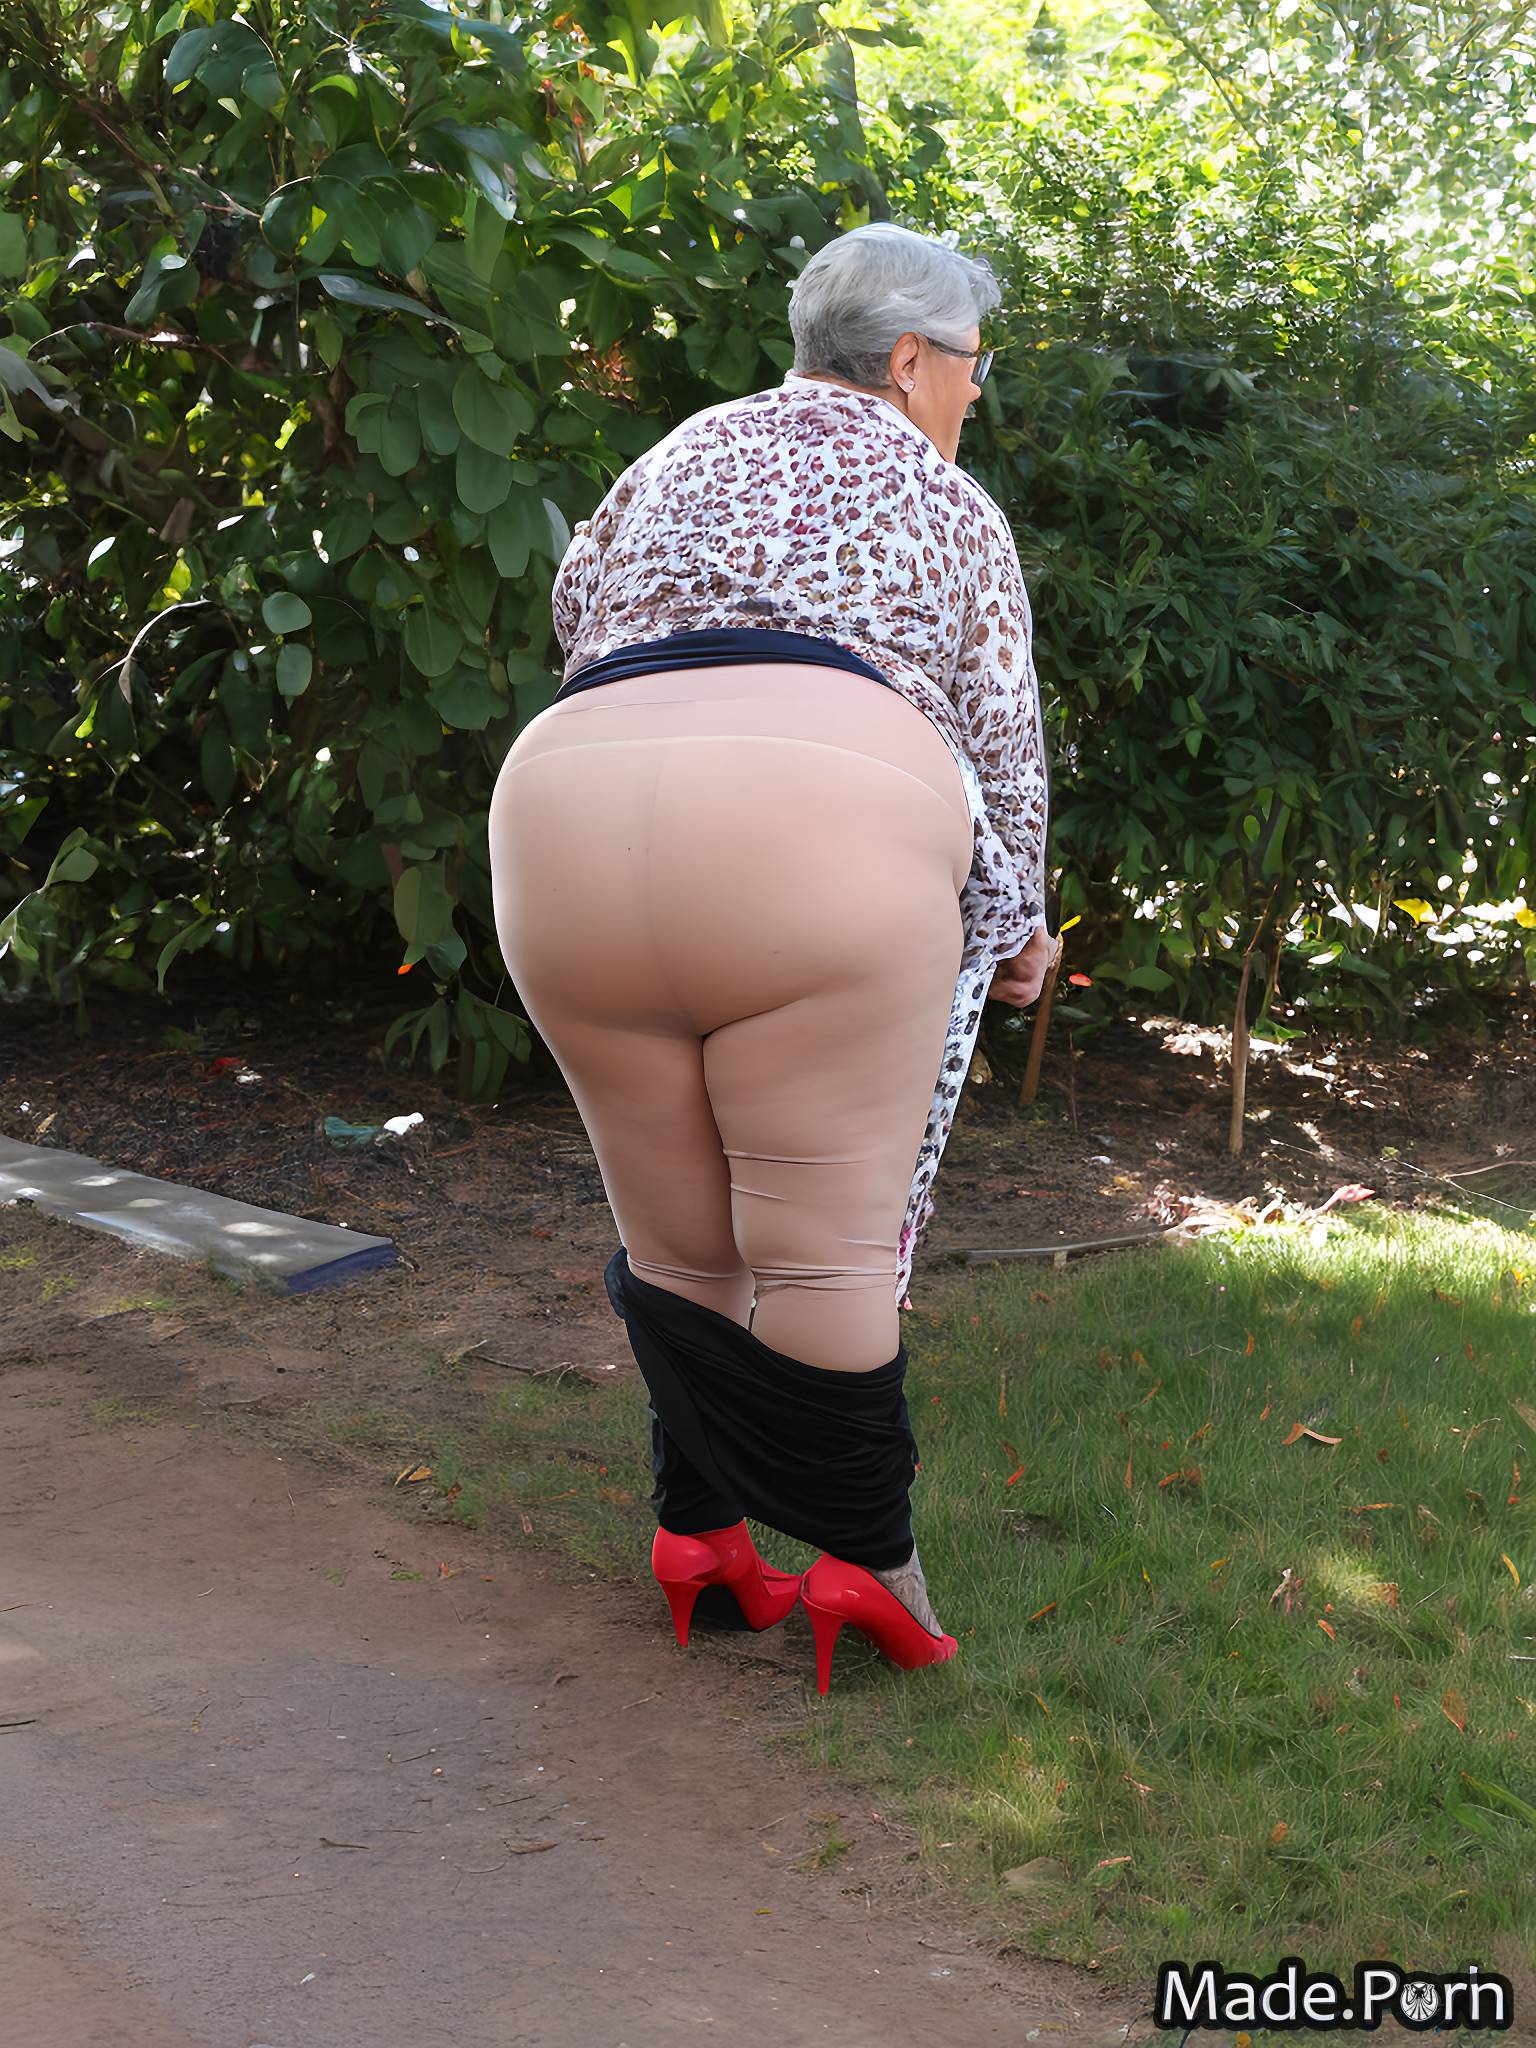 from behind ssbbw big ass back view fat photo pantyhose